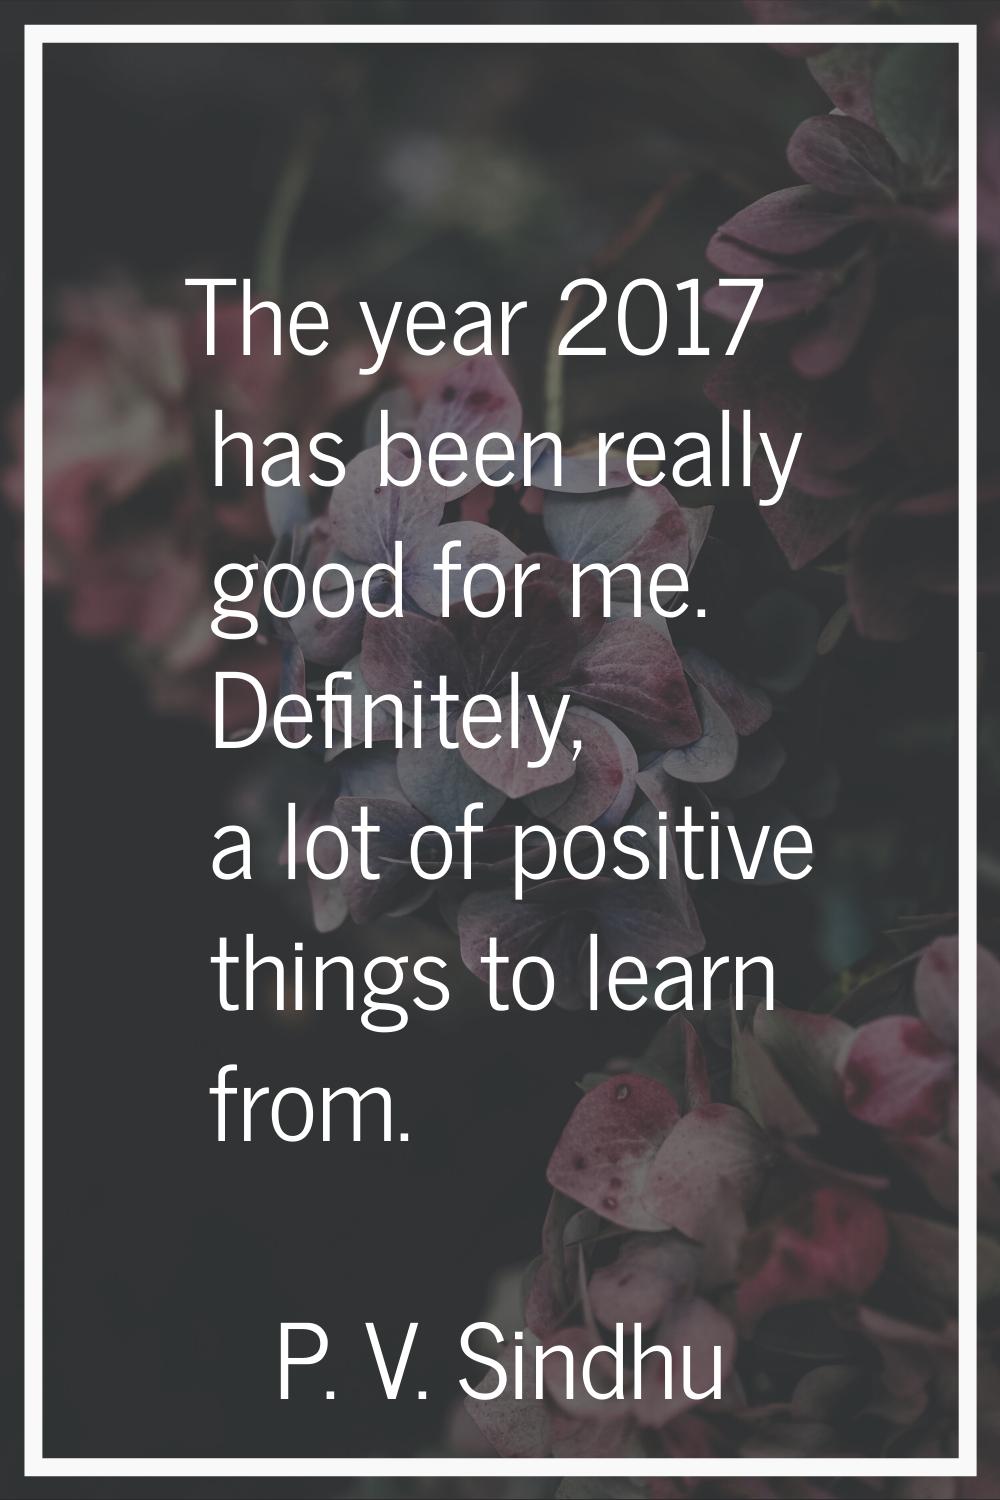 The year 2017 has been really good for me. Definitely, a lot of positive things to learn from.